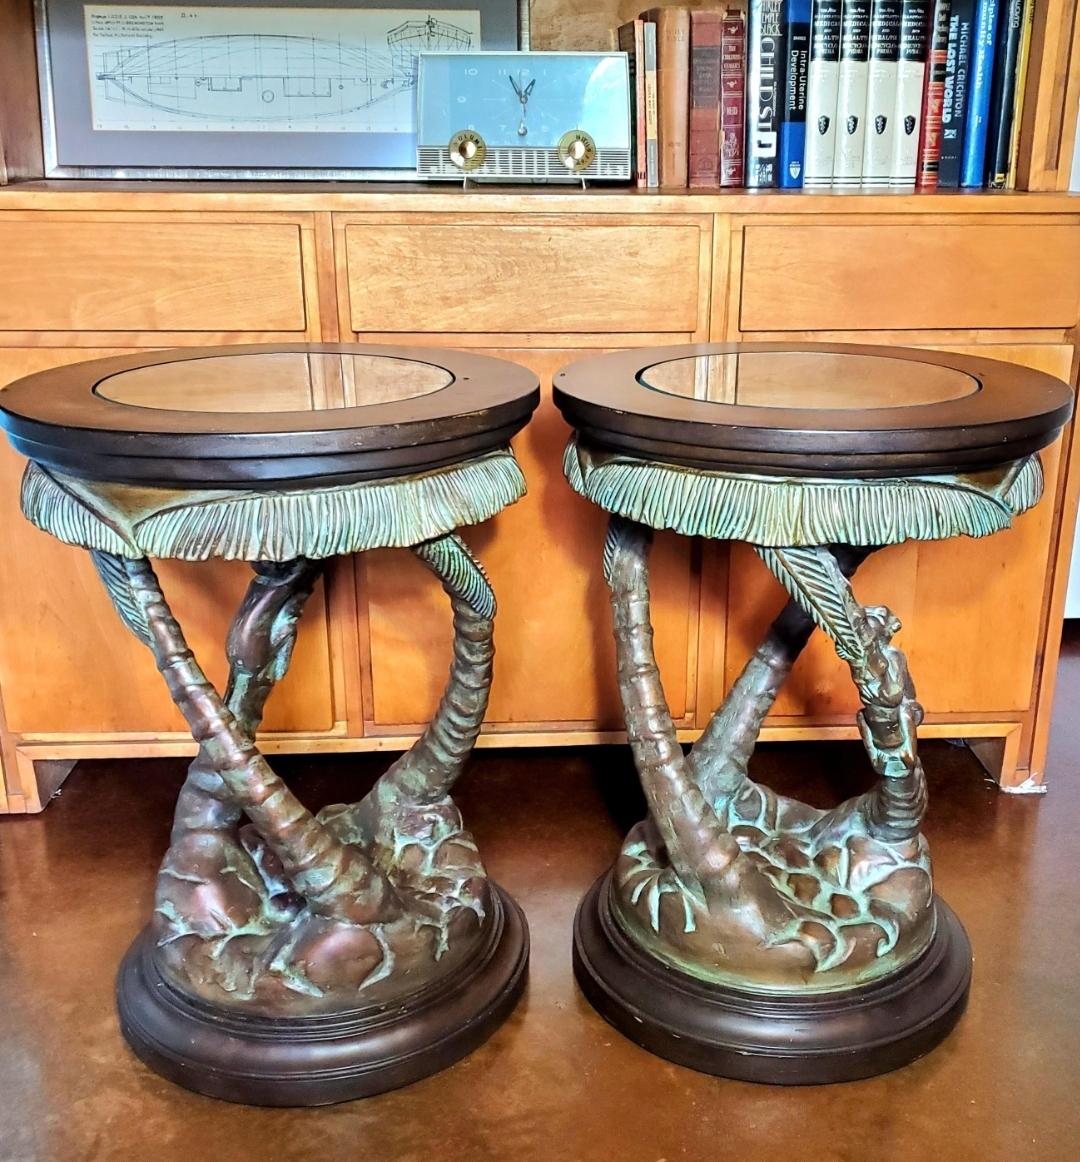 Maitland Smith
A pair of glass topped pedestal side tables. The round table has a 1/2